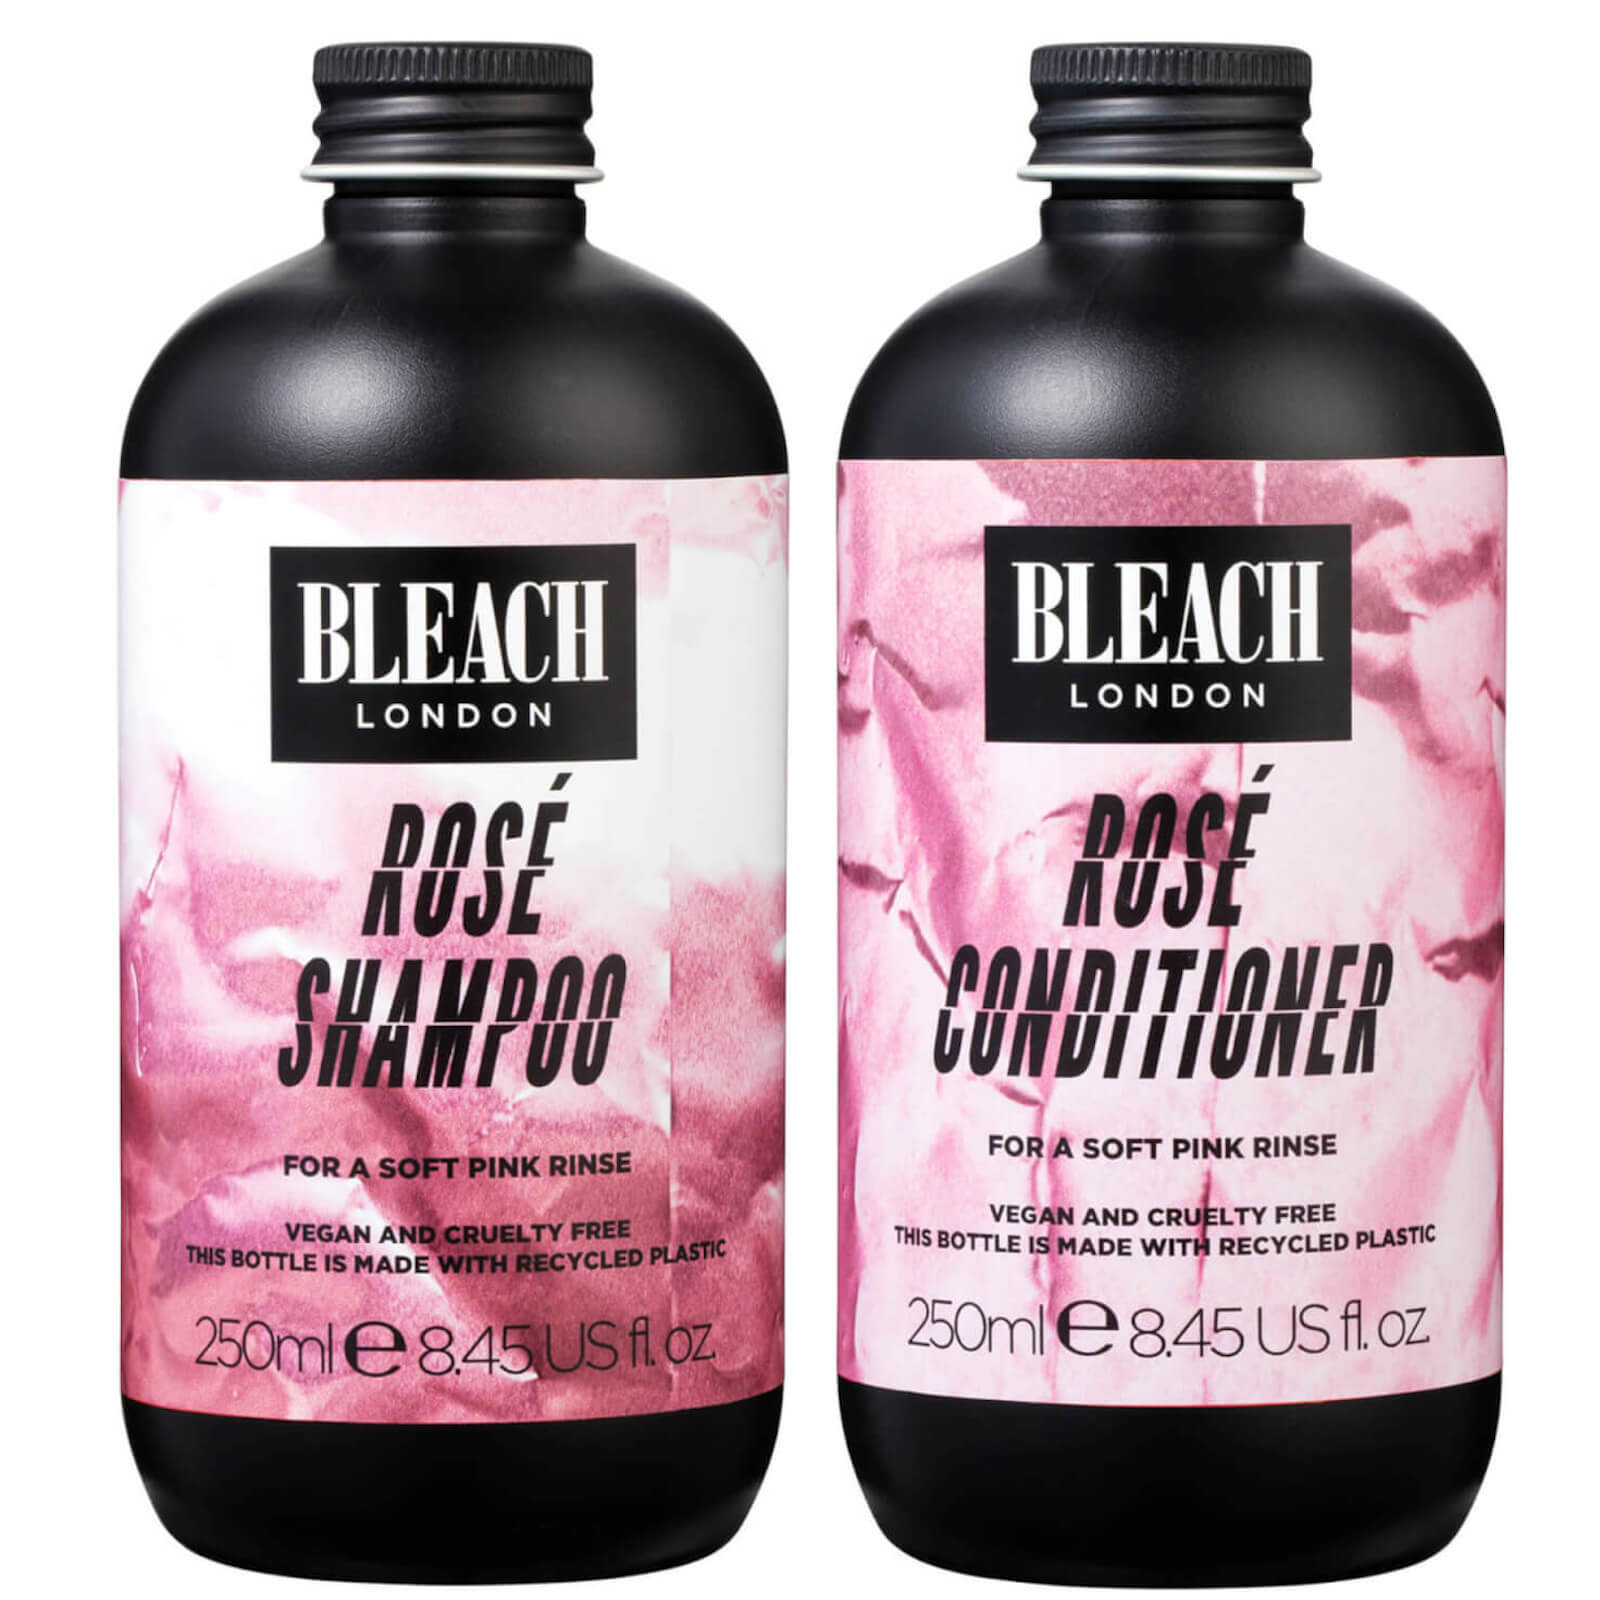 Image of BLEACH LONDON Rose Shampoo and Conditioner Duo